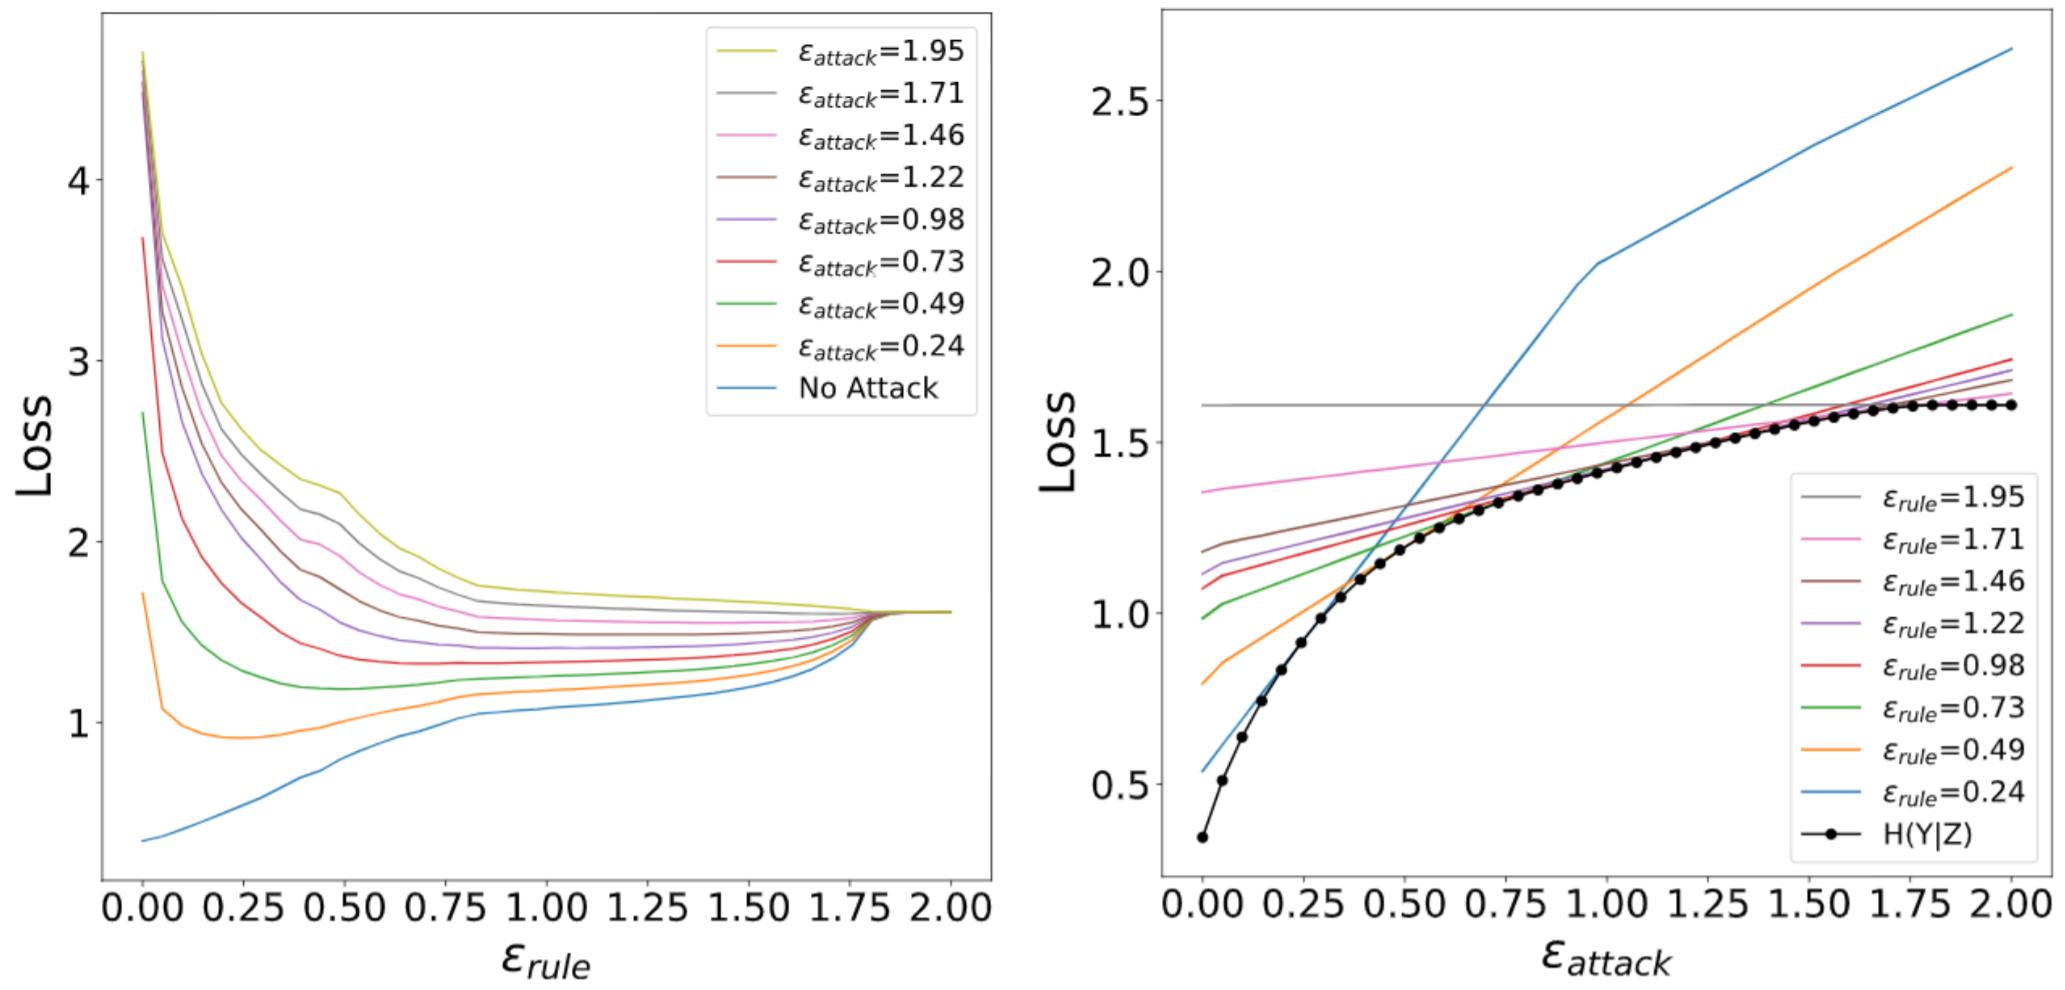 Figure 4: Model loss depends on the attack strength (in terms of perturbation distance) and the strength that the model was designed for, with mismatch leading to suboptimality.